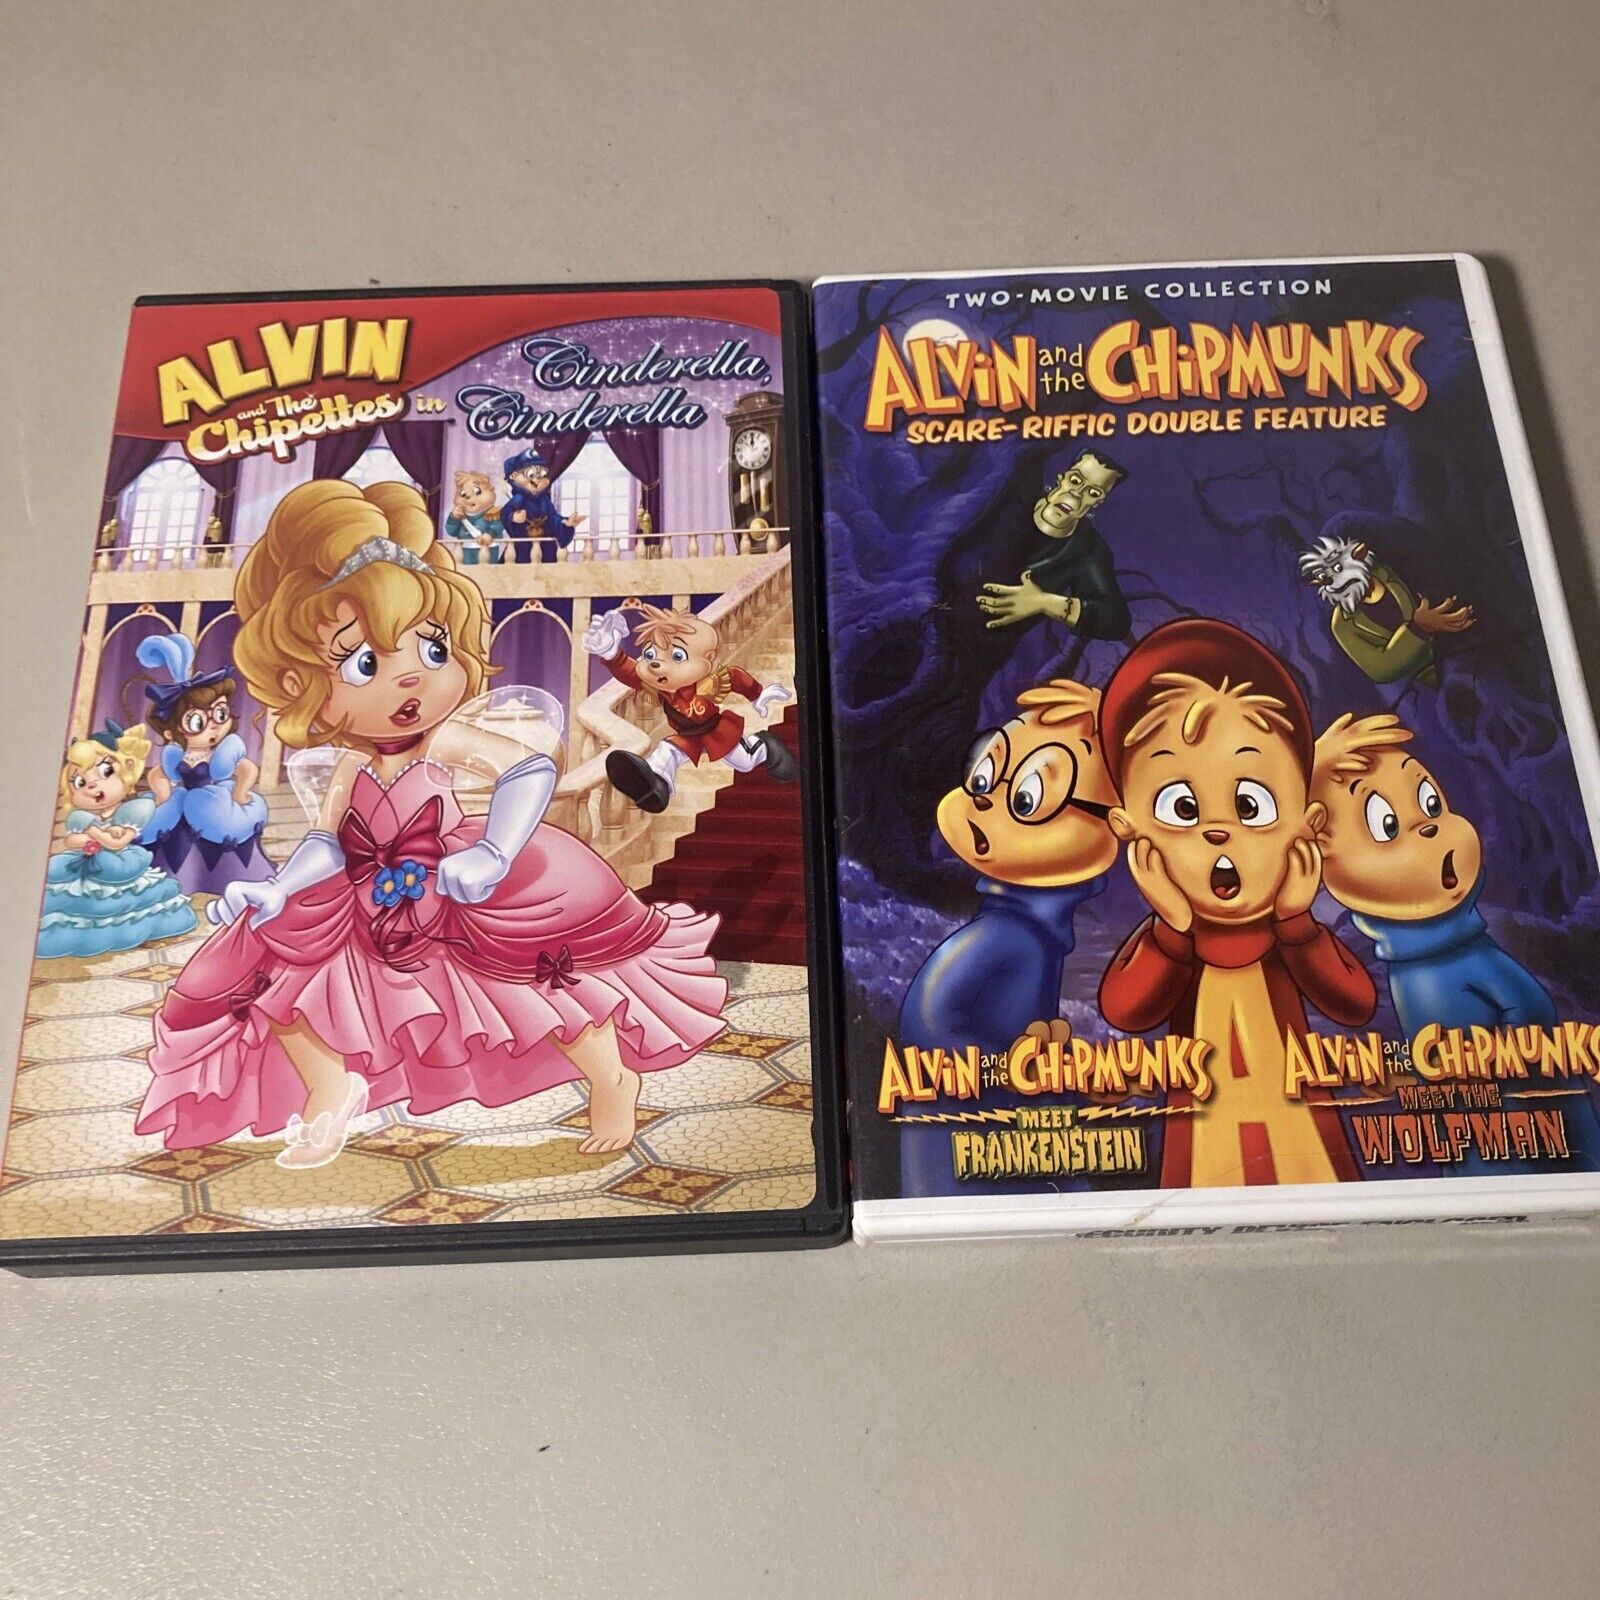 Alvin and the Chipmunks: Alvin and the Chipettes in Cinderella & Scareific Lot 2